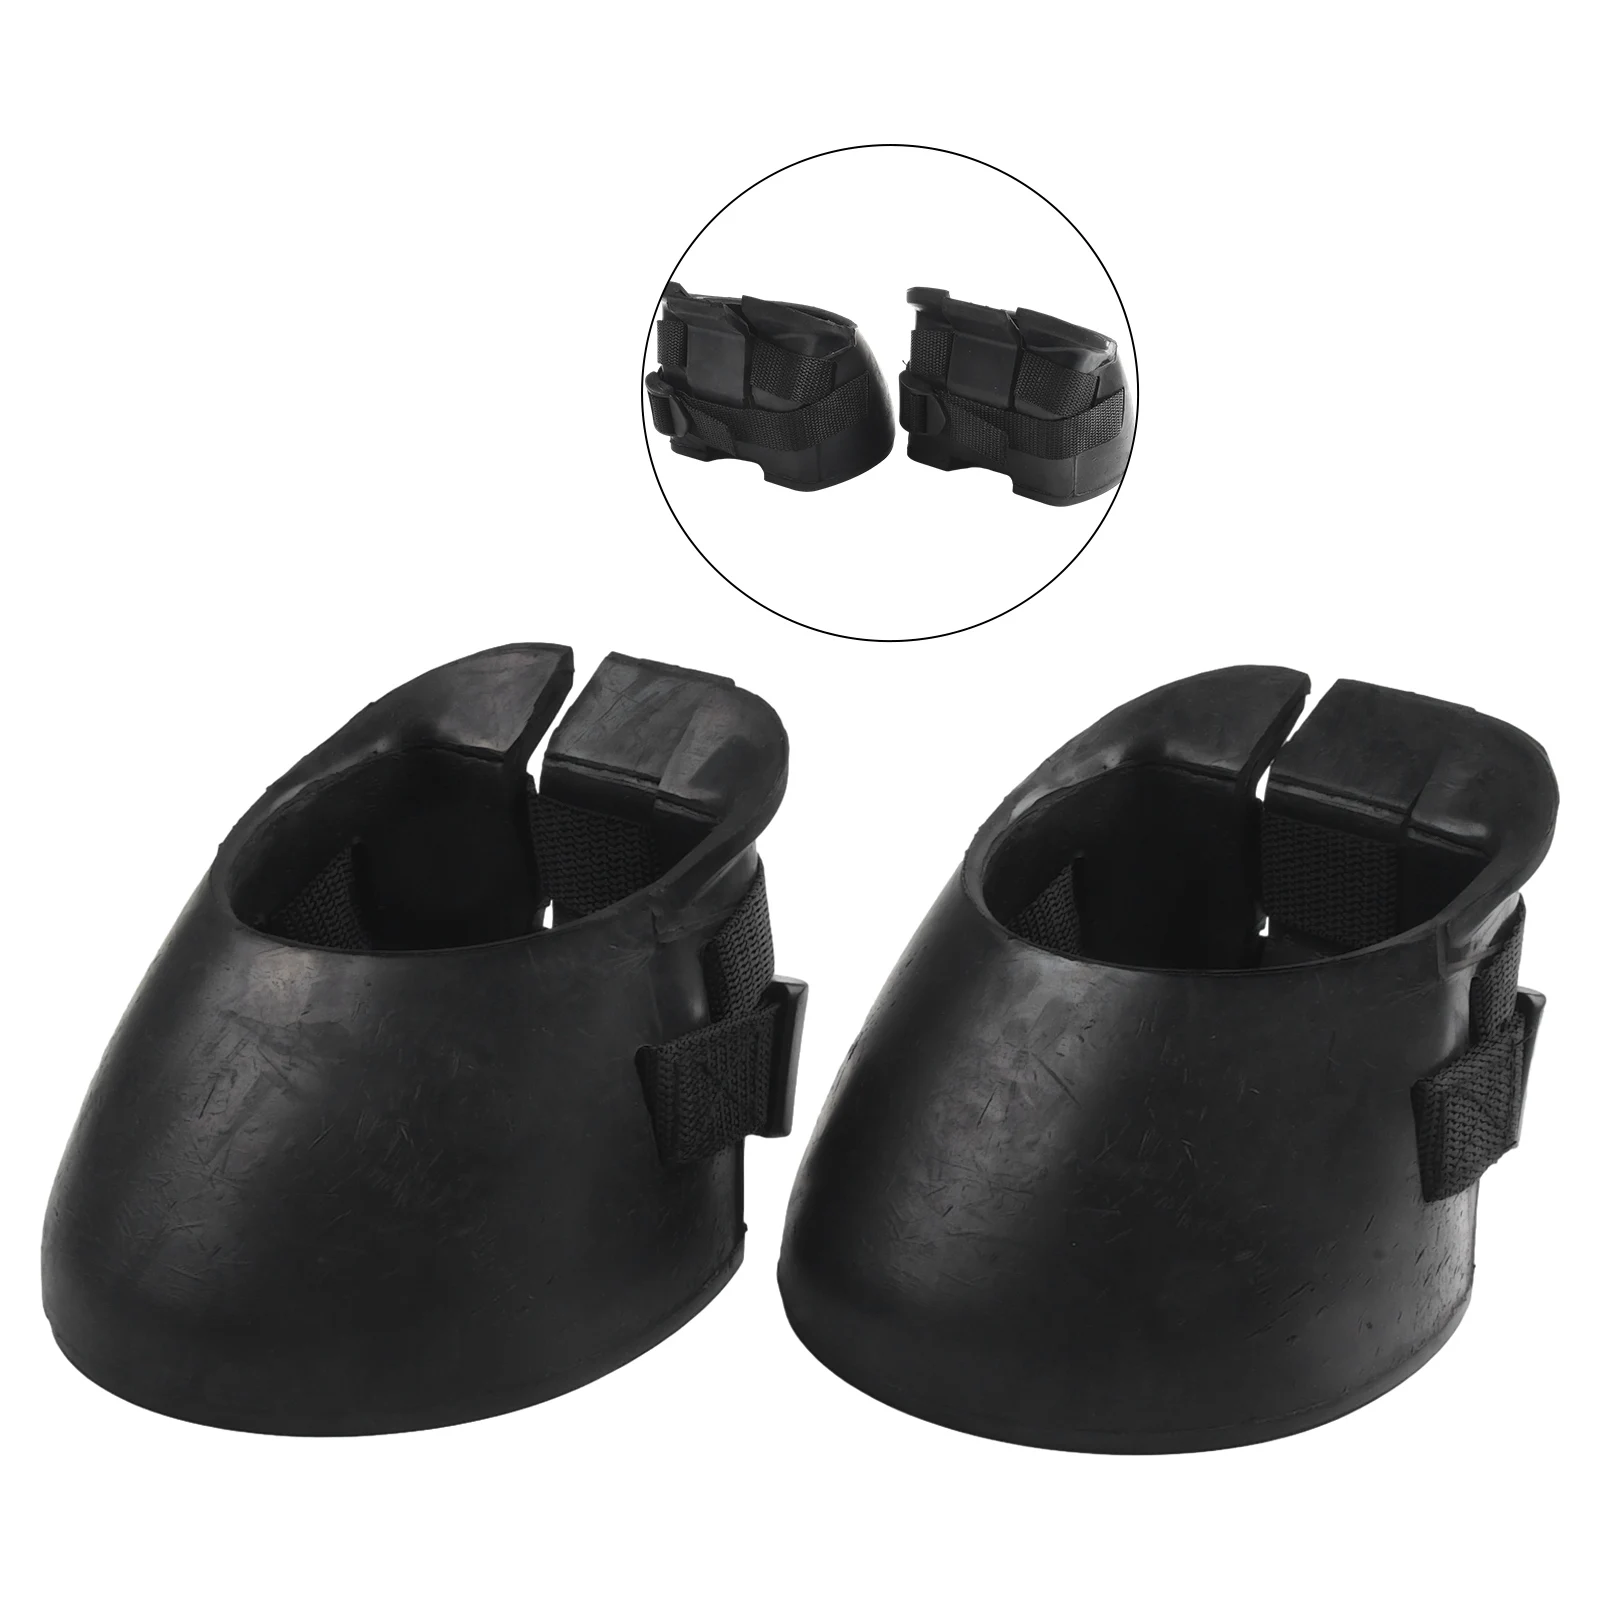 

High Quality Practical Durable Functional Horse Hoof Boots Protect Cover Rubber Sporting Black Isolate Dirty Water Optional Size